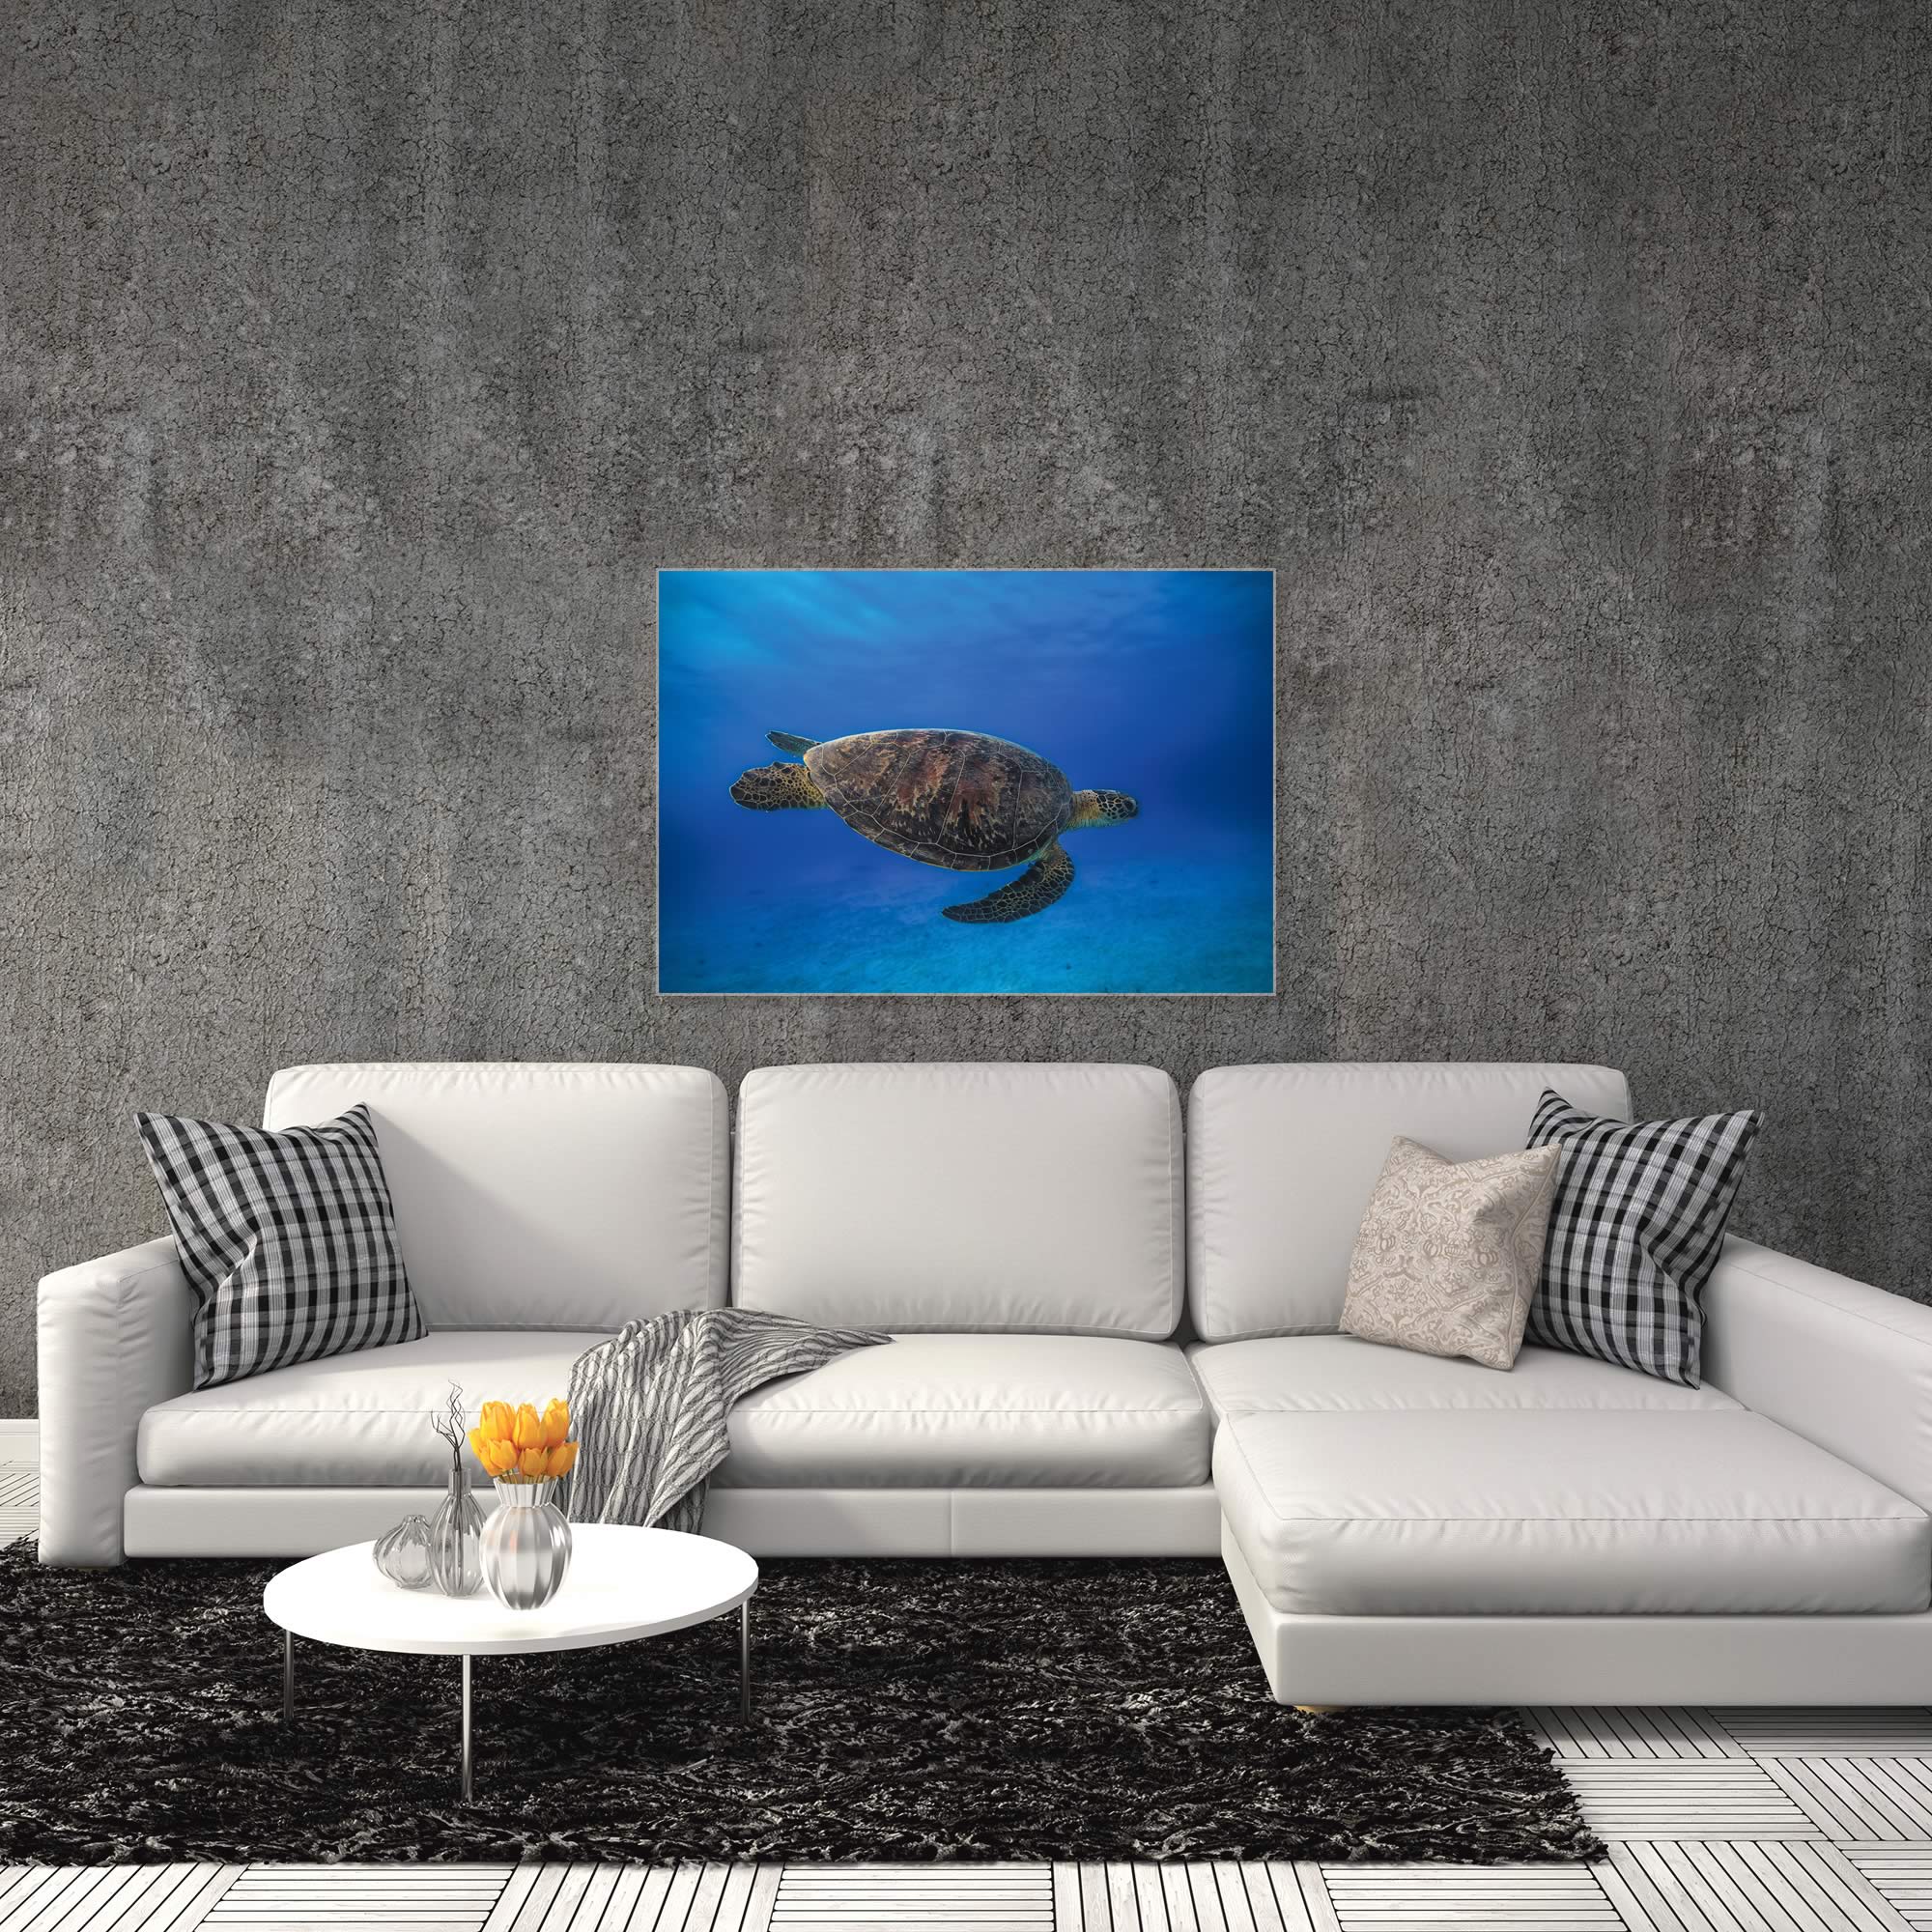 Green Turtle in the Blue by Barathieu Gabriel - Sea Turtle Art on Metal or Acrylic - Alternate View 3